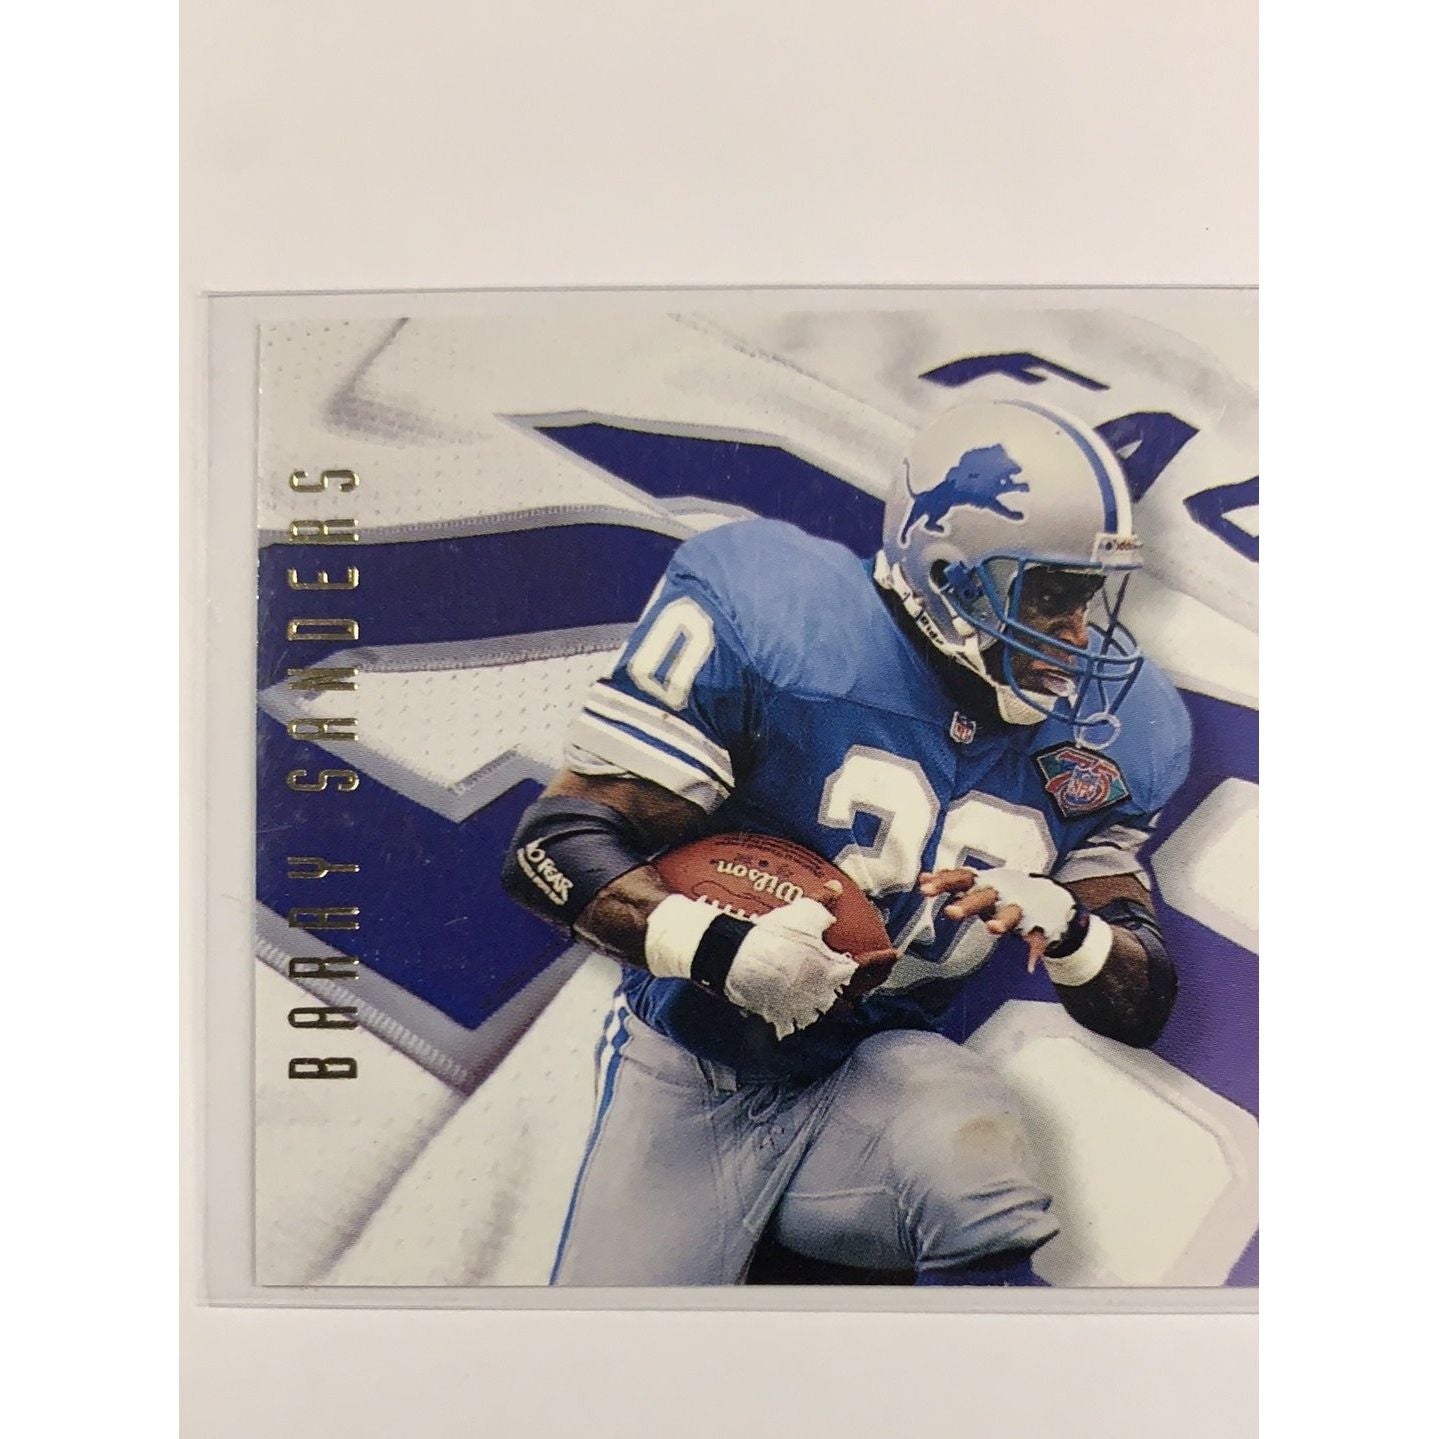  1995 Skybox Marshall Faulk Barry Sanders Mirror Image  Local Legends Cards & Collectibles